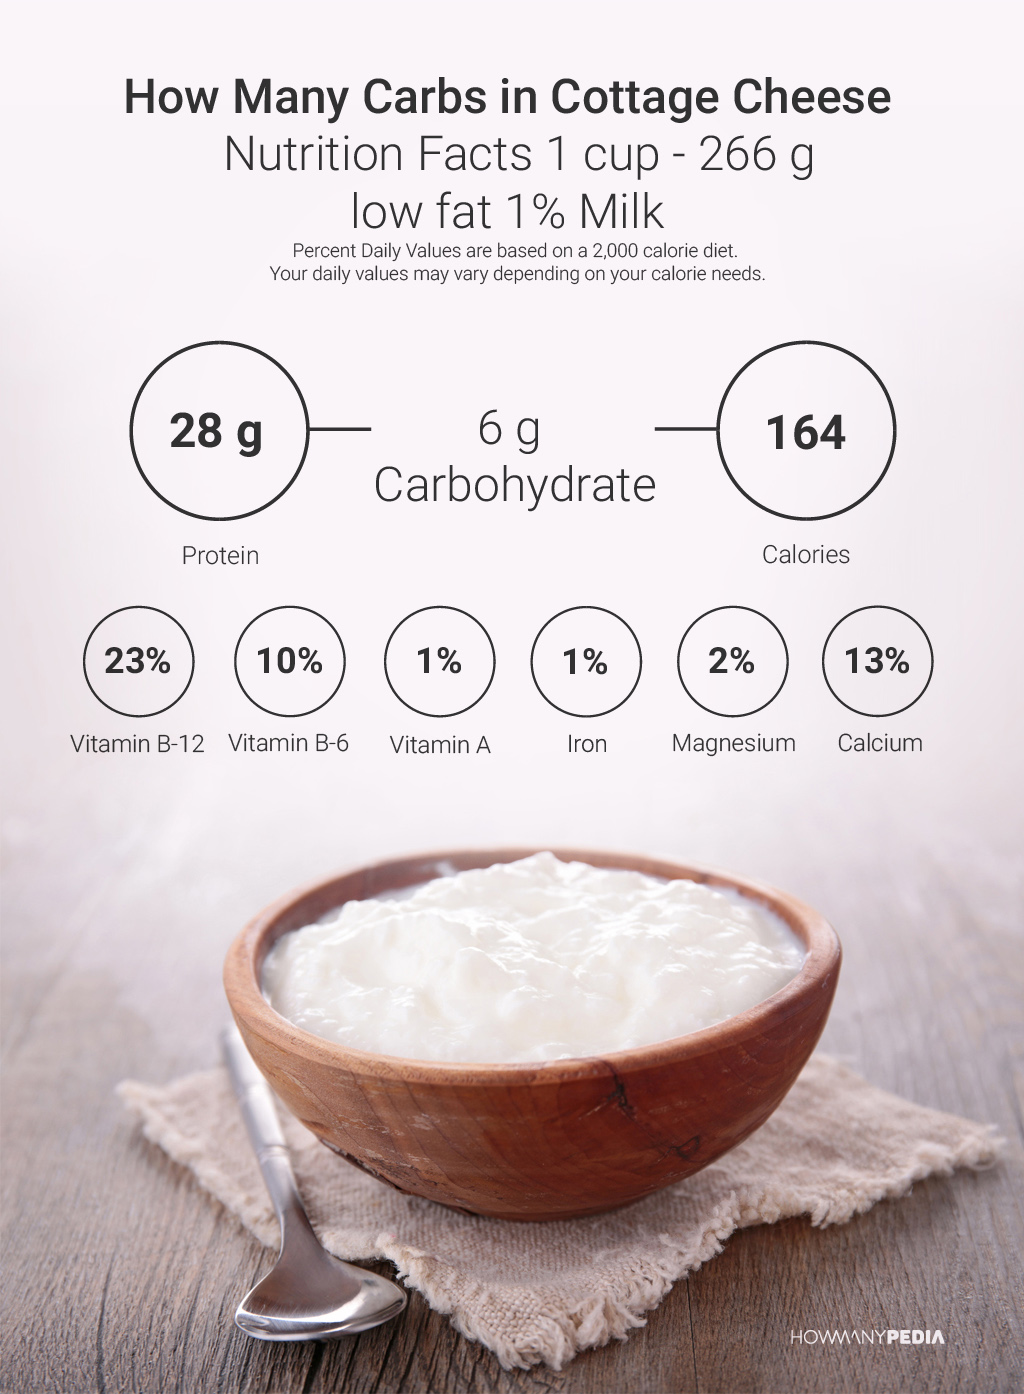 How Many Carbs in Cottage Cheese Nutrition facts